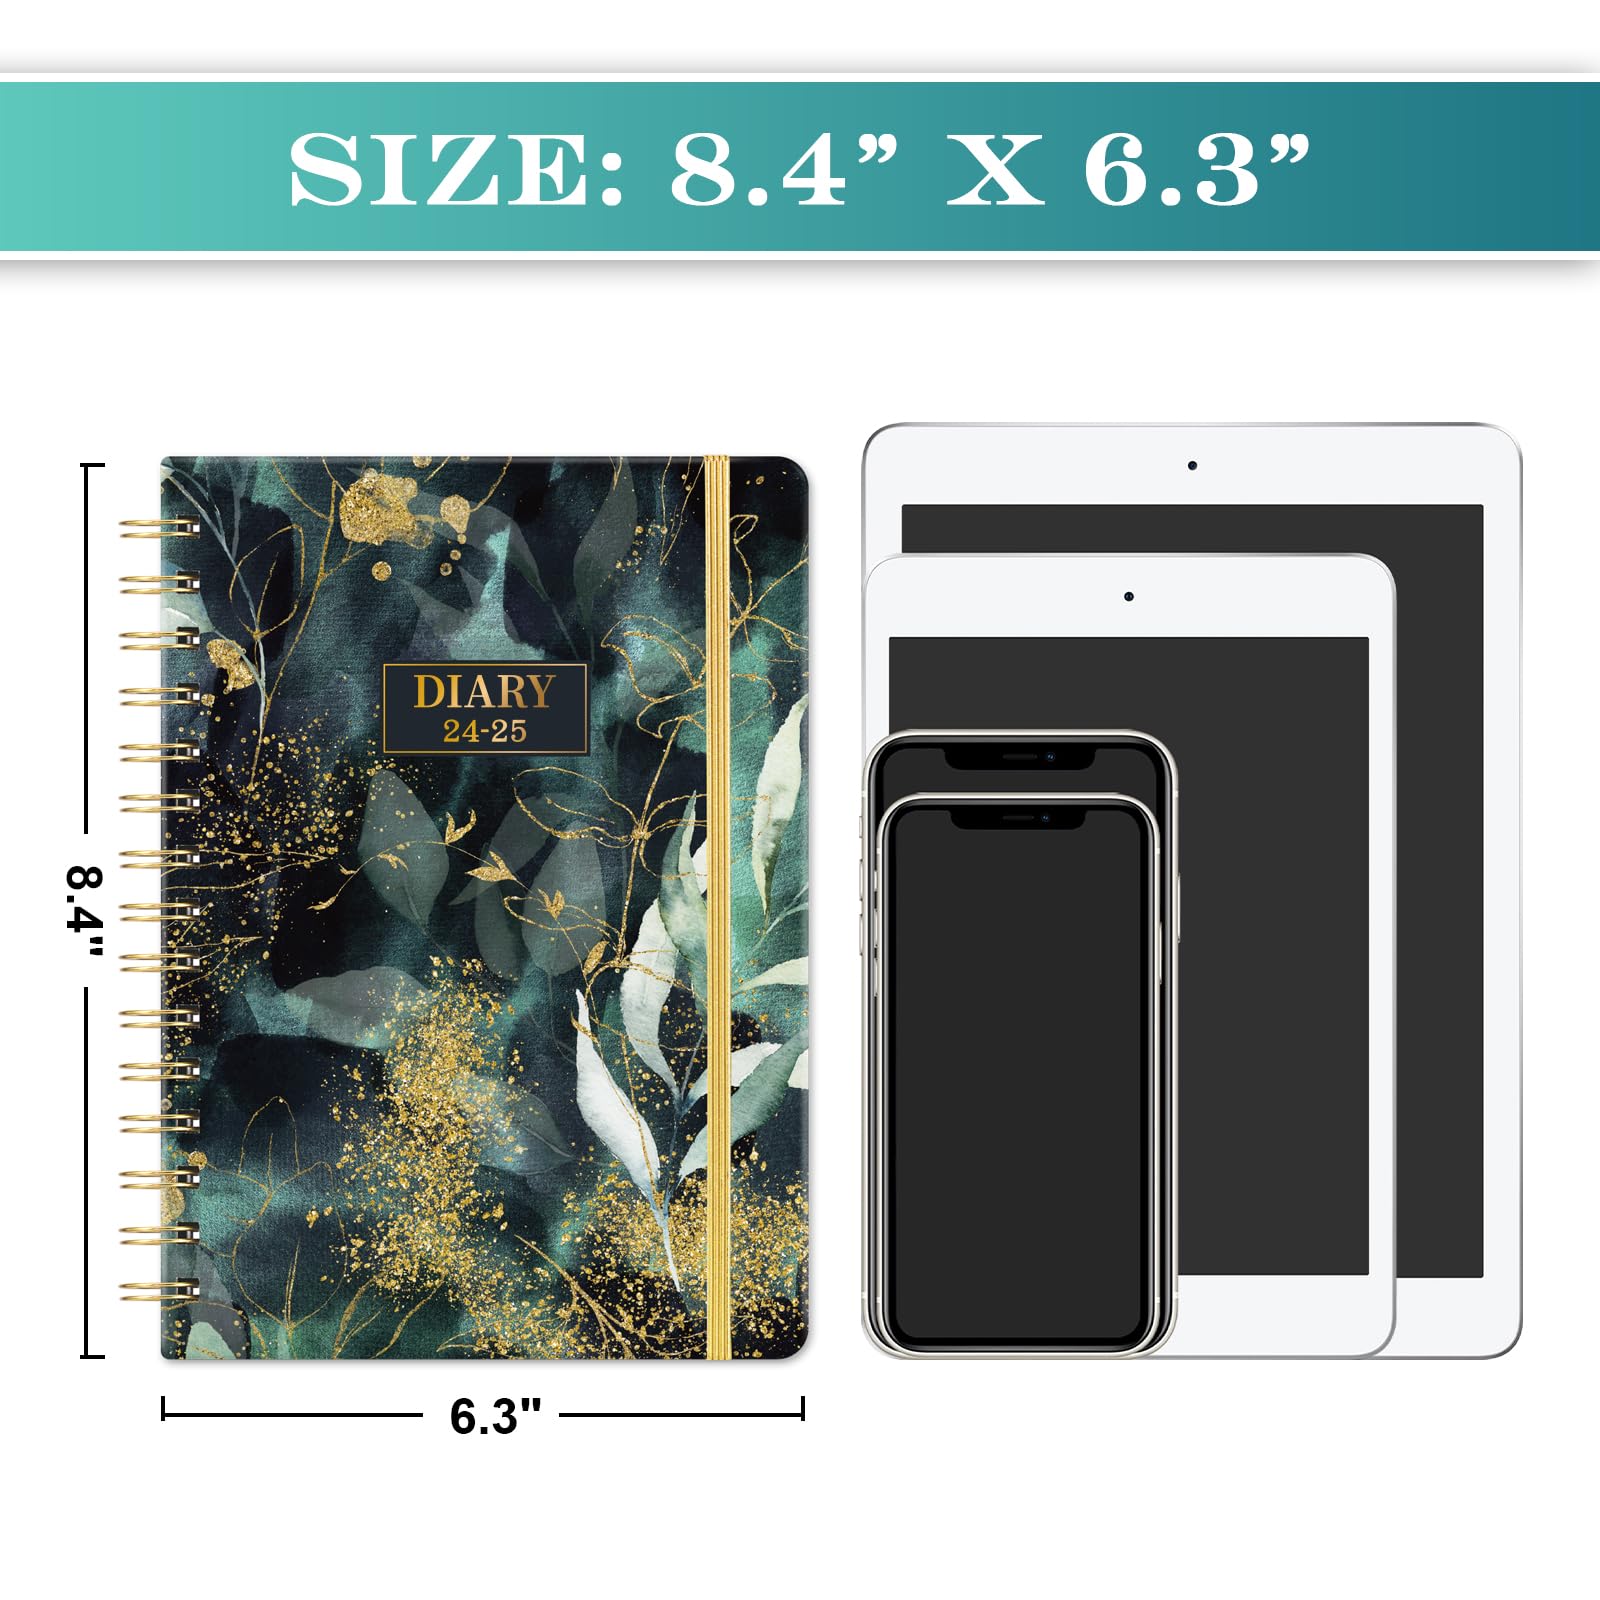 Academic Diary 2024-2025 - Diary 2024-2025 A5 Week to View from August 2024 to July 2025, Twin-Wire Binding, Hard Cover, Elastic Closure, 21.5 x 15.5 x 1.5 cm, Golden leaf